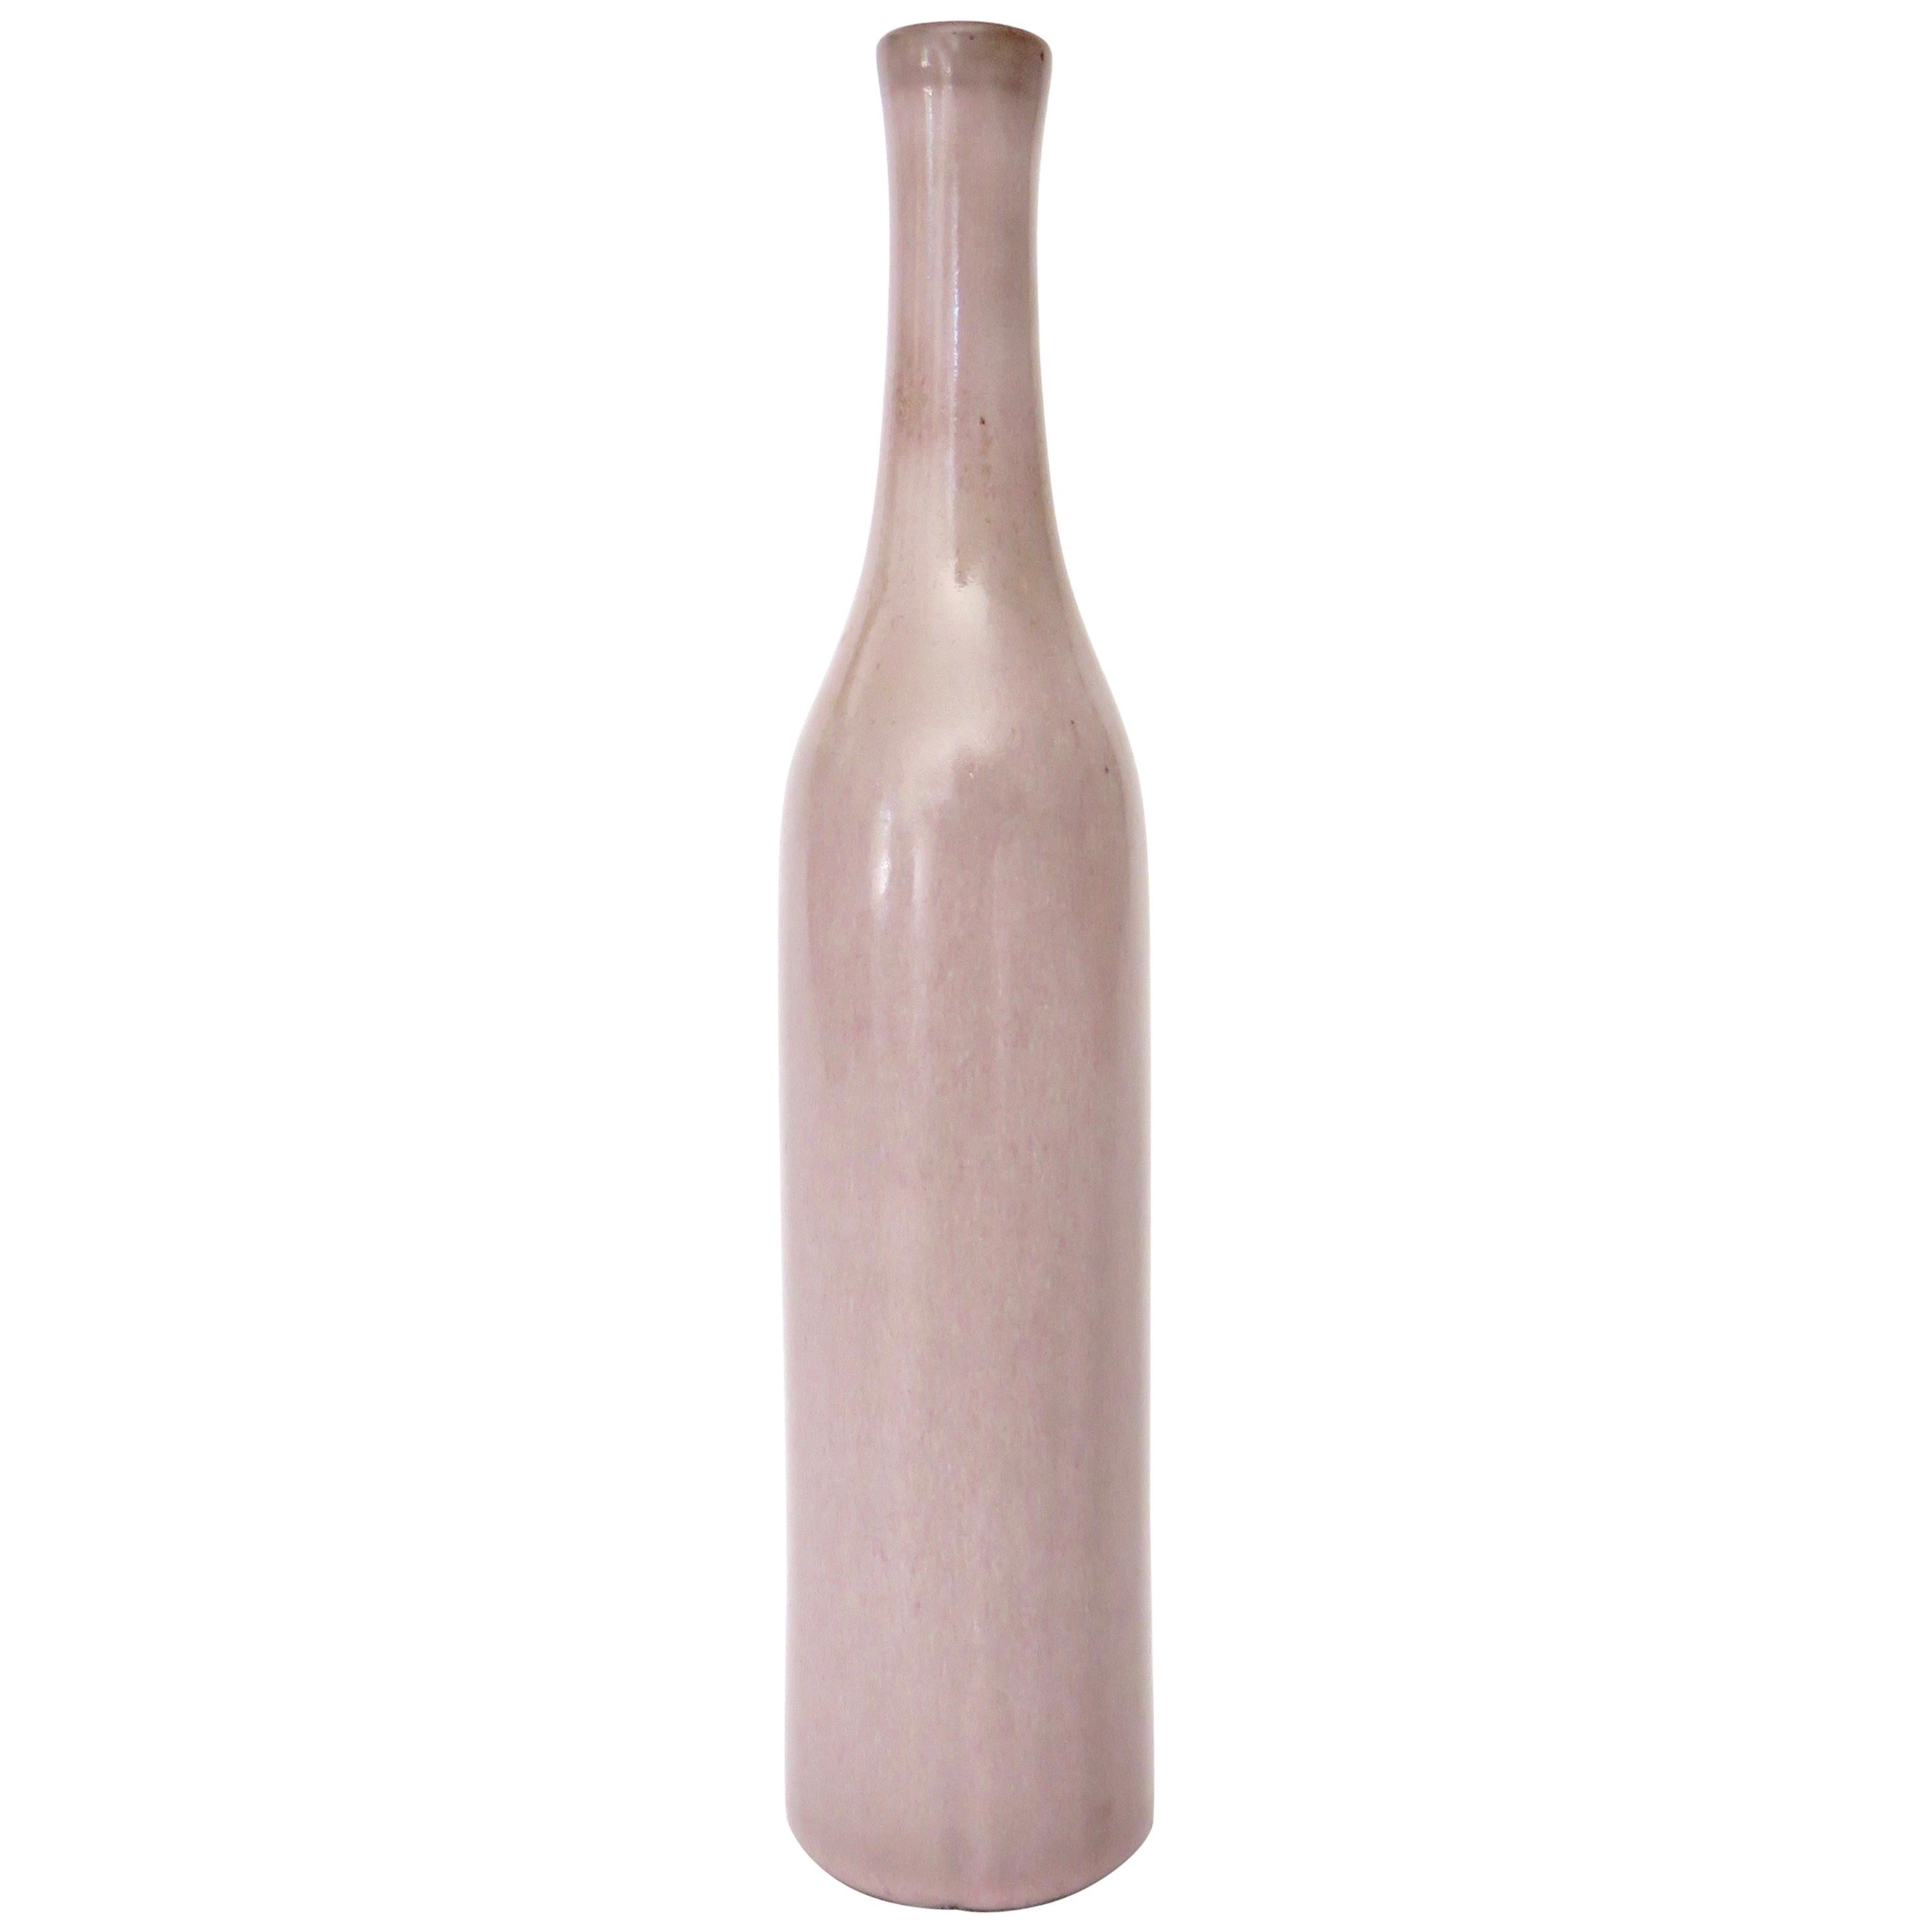 Jacques and Dani Ruelland French Ceramic Bottle in Pale Rose Lavender Glaze